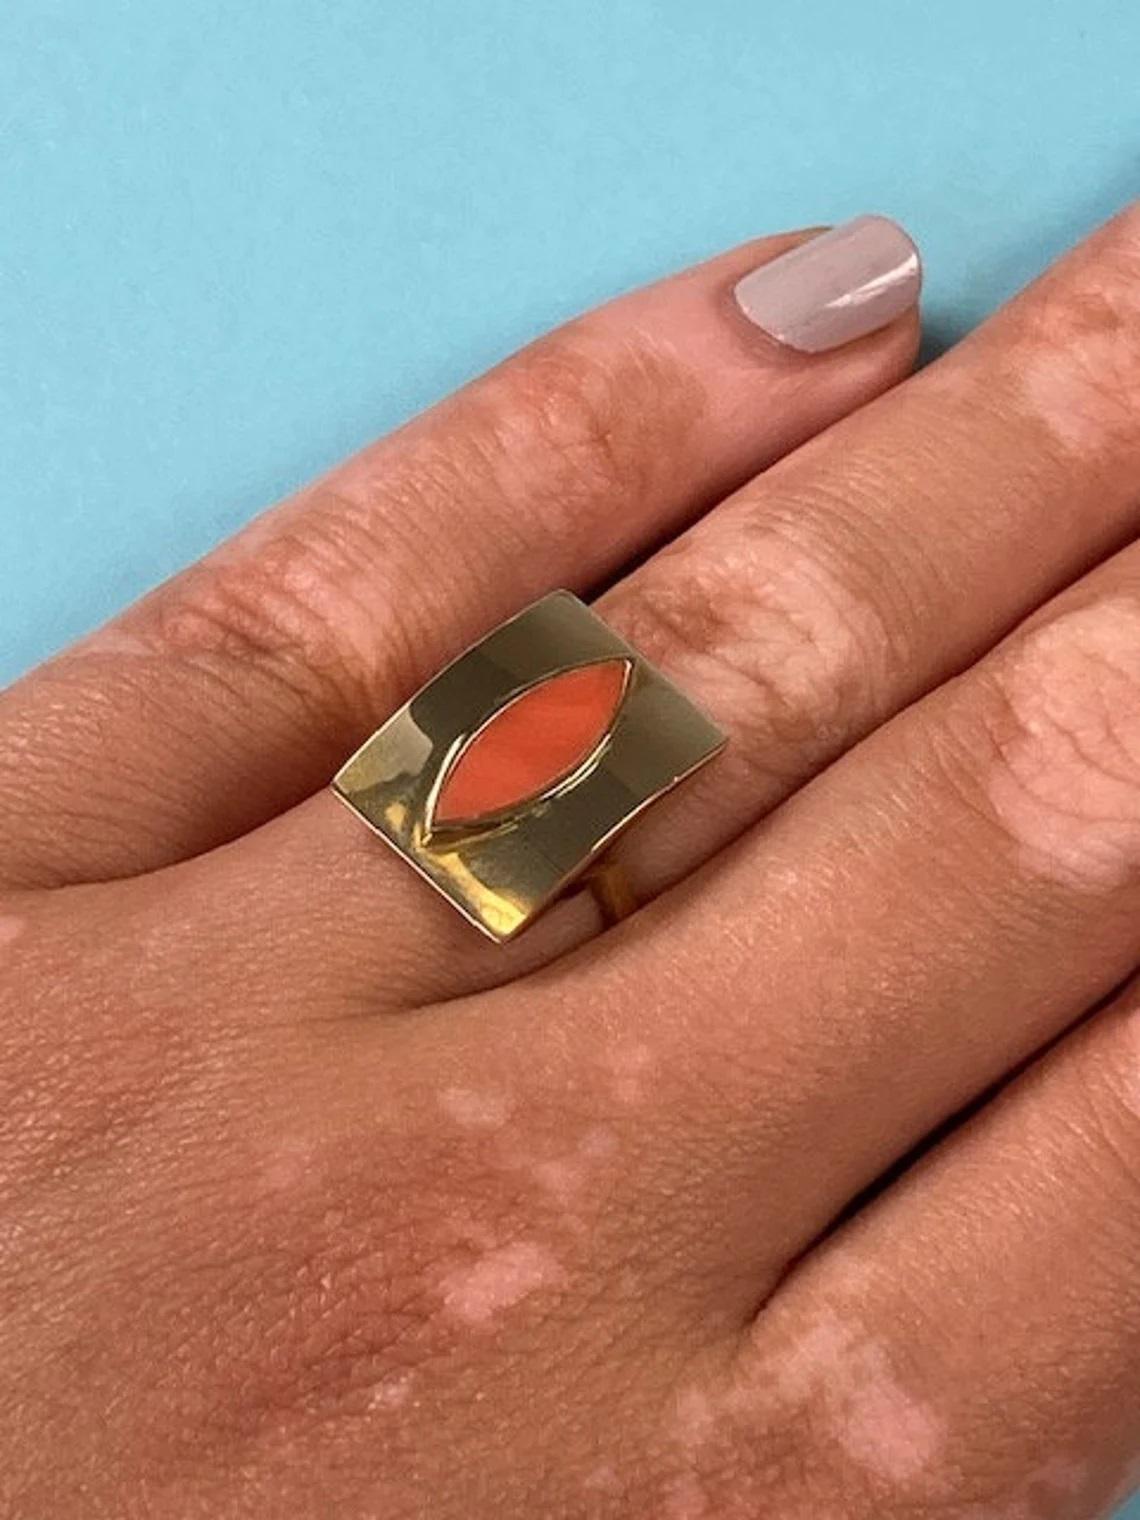 Vintage 14k Gold Coral Leaf Ring One-of-a-kind

This vintage ring truly is the perfect statement piece, with its unique coral leaf and angular gold casing. It was made in the 1980s and comfortably fits a size M finger!

Vintage from the 1980s 
Size: